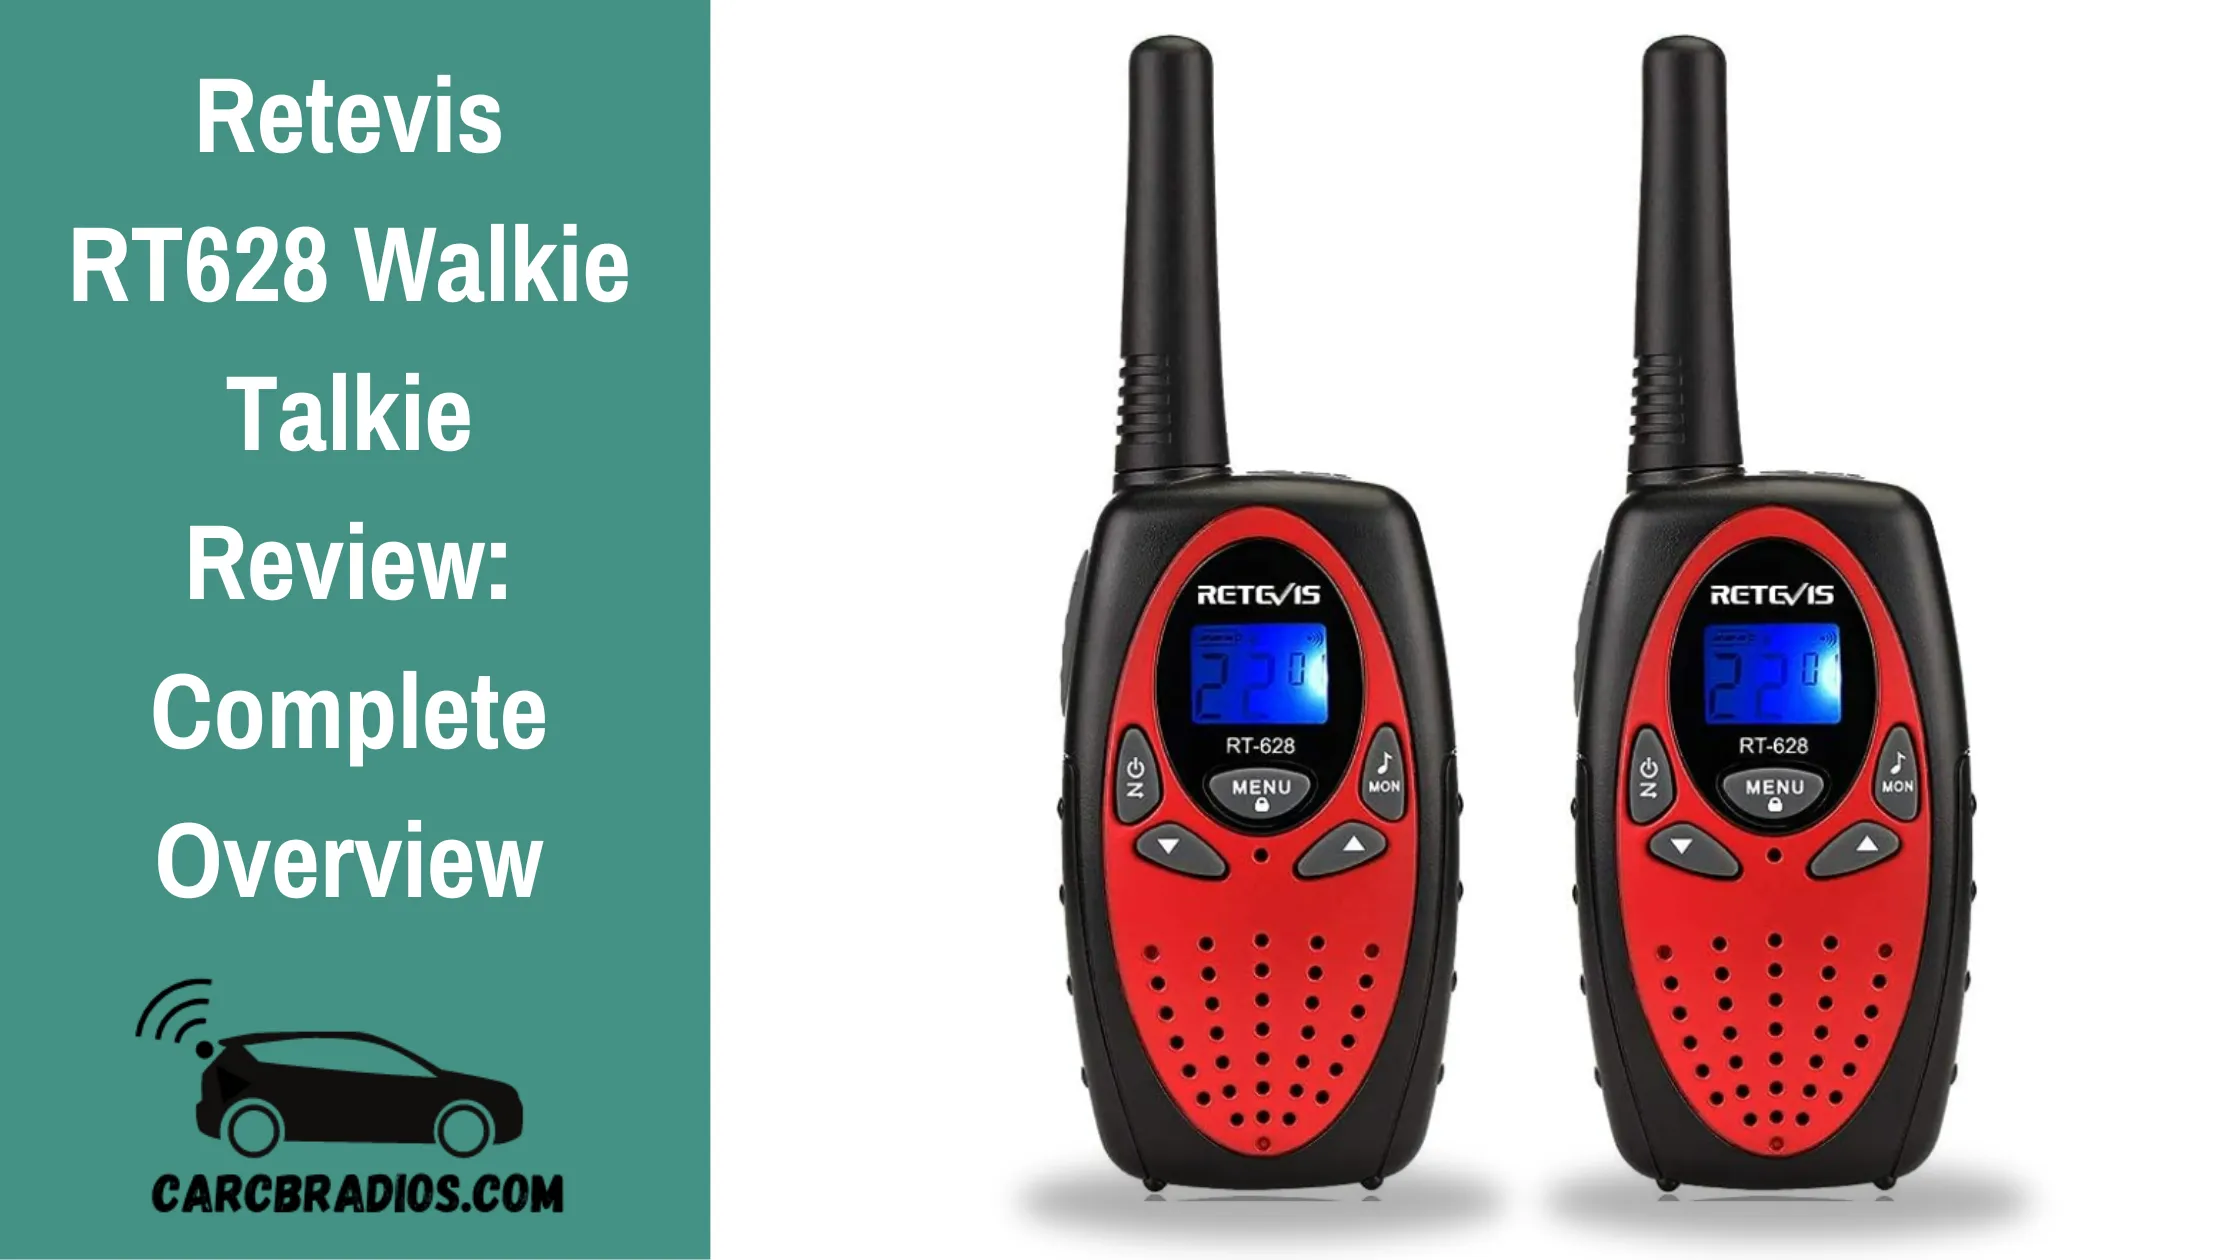 In this review, I'll provide an overview of the Retevis RT628 Walkie Talkies and evaluate their performance in terms of range, sound quality, and battery life. I'll also discuss the ease of use of these devices and compare them to similar products on the market. Finally, I'll provide a list of pros and cons and offer my final verdict on whether these walkie talkies are worth the investment.